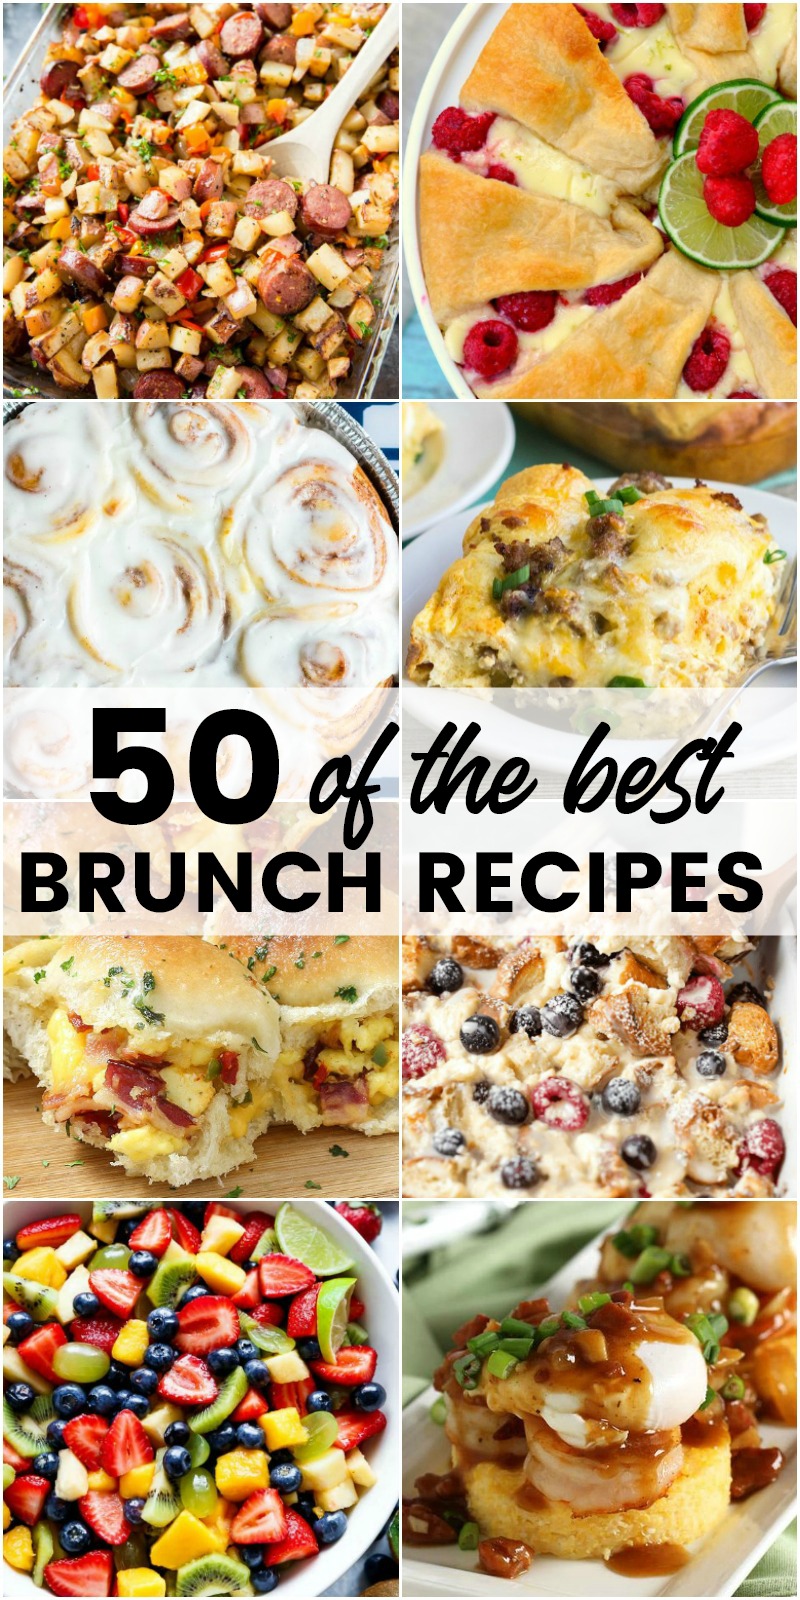 Sleep in and grab your favorite cocktail! Your morning is about to be amazing with 50 of the Best Brunch Recipes for a lazy weekend meal that'll leave you happy and satisfied!